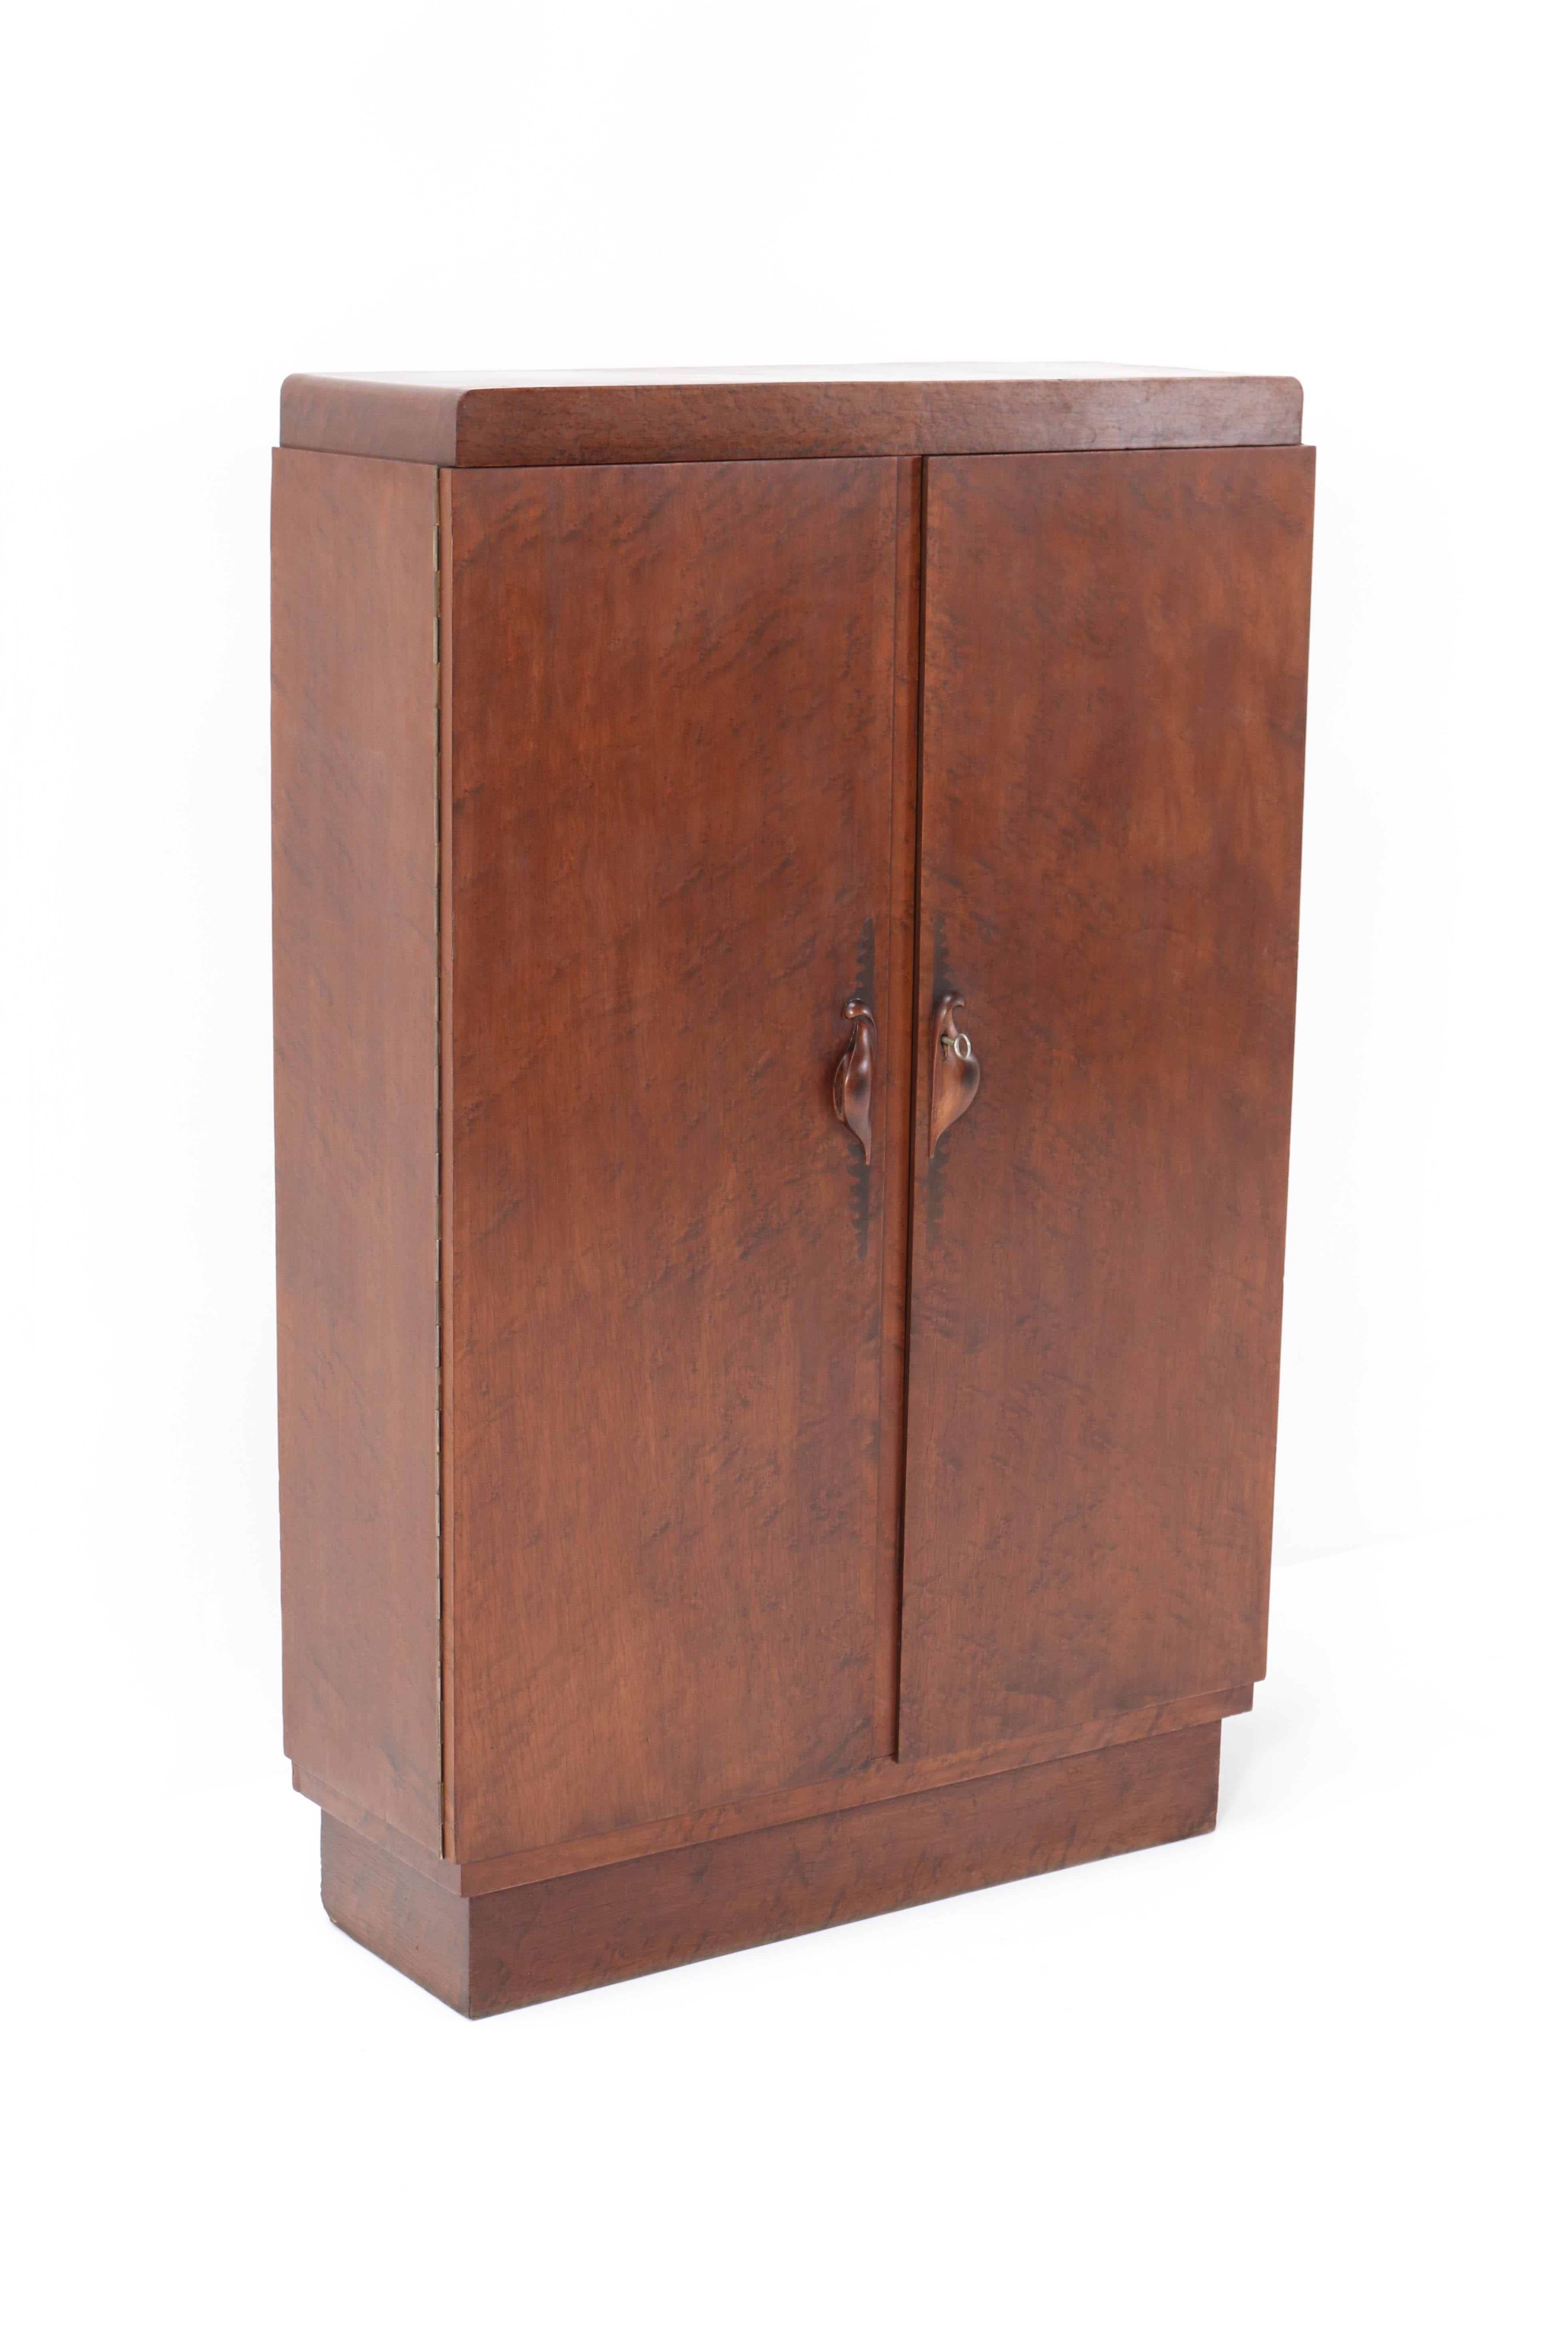 Stunning and rare Art Deco Amsterdam School cabinet.
Design by 't Woonhuys Amsterdam.
Striking Dutch design from the twenties.
Birdseye Maple with magnificent shaped handles on both doors.
In very good original condition with minor wear